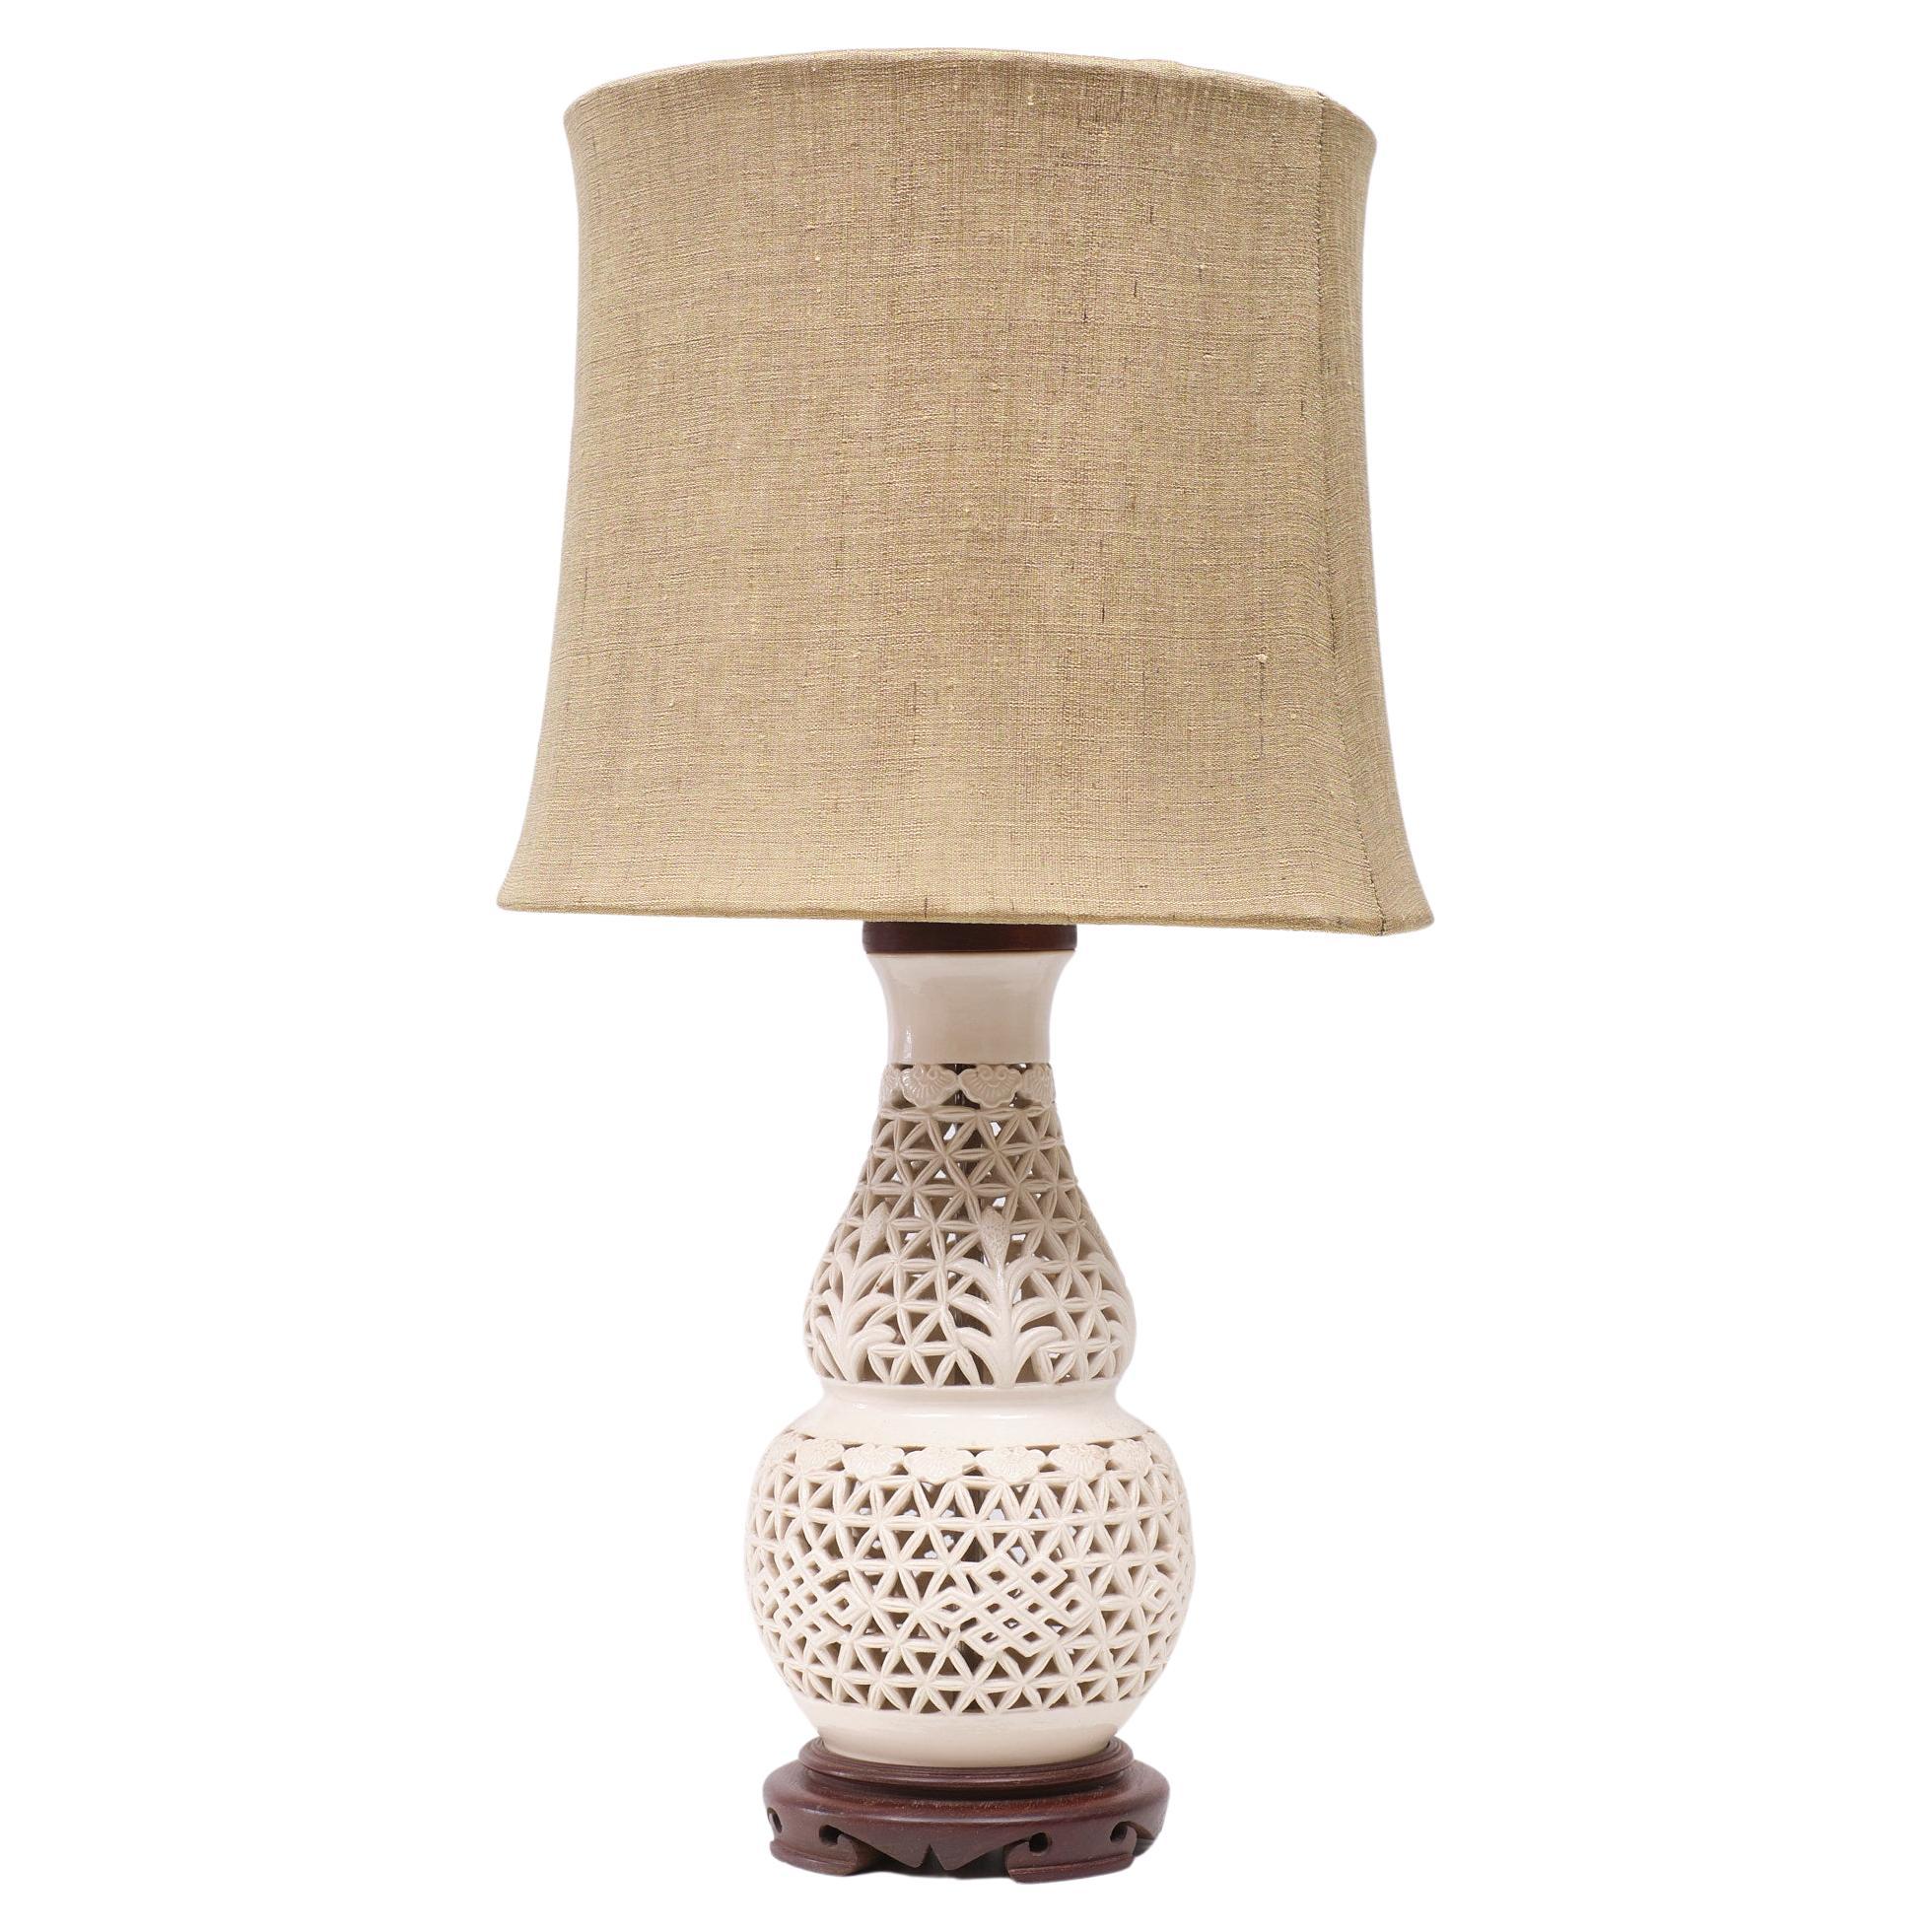 Reticulated Chinoiserie Blanc De Chine Table Lamp  1960s 